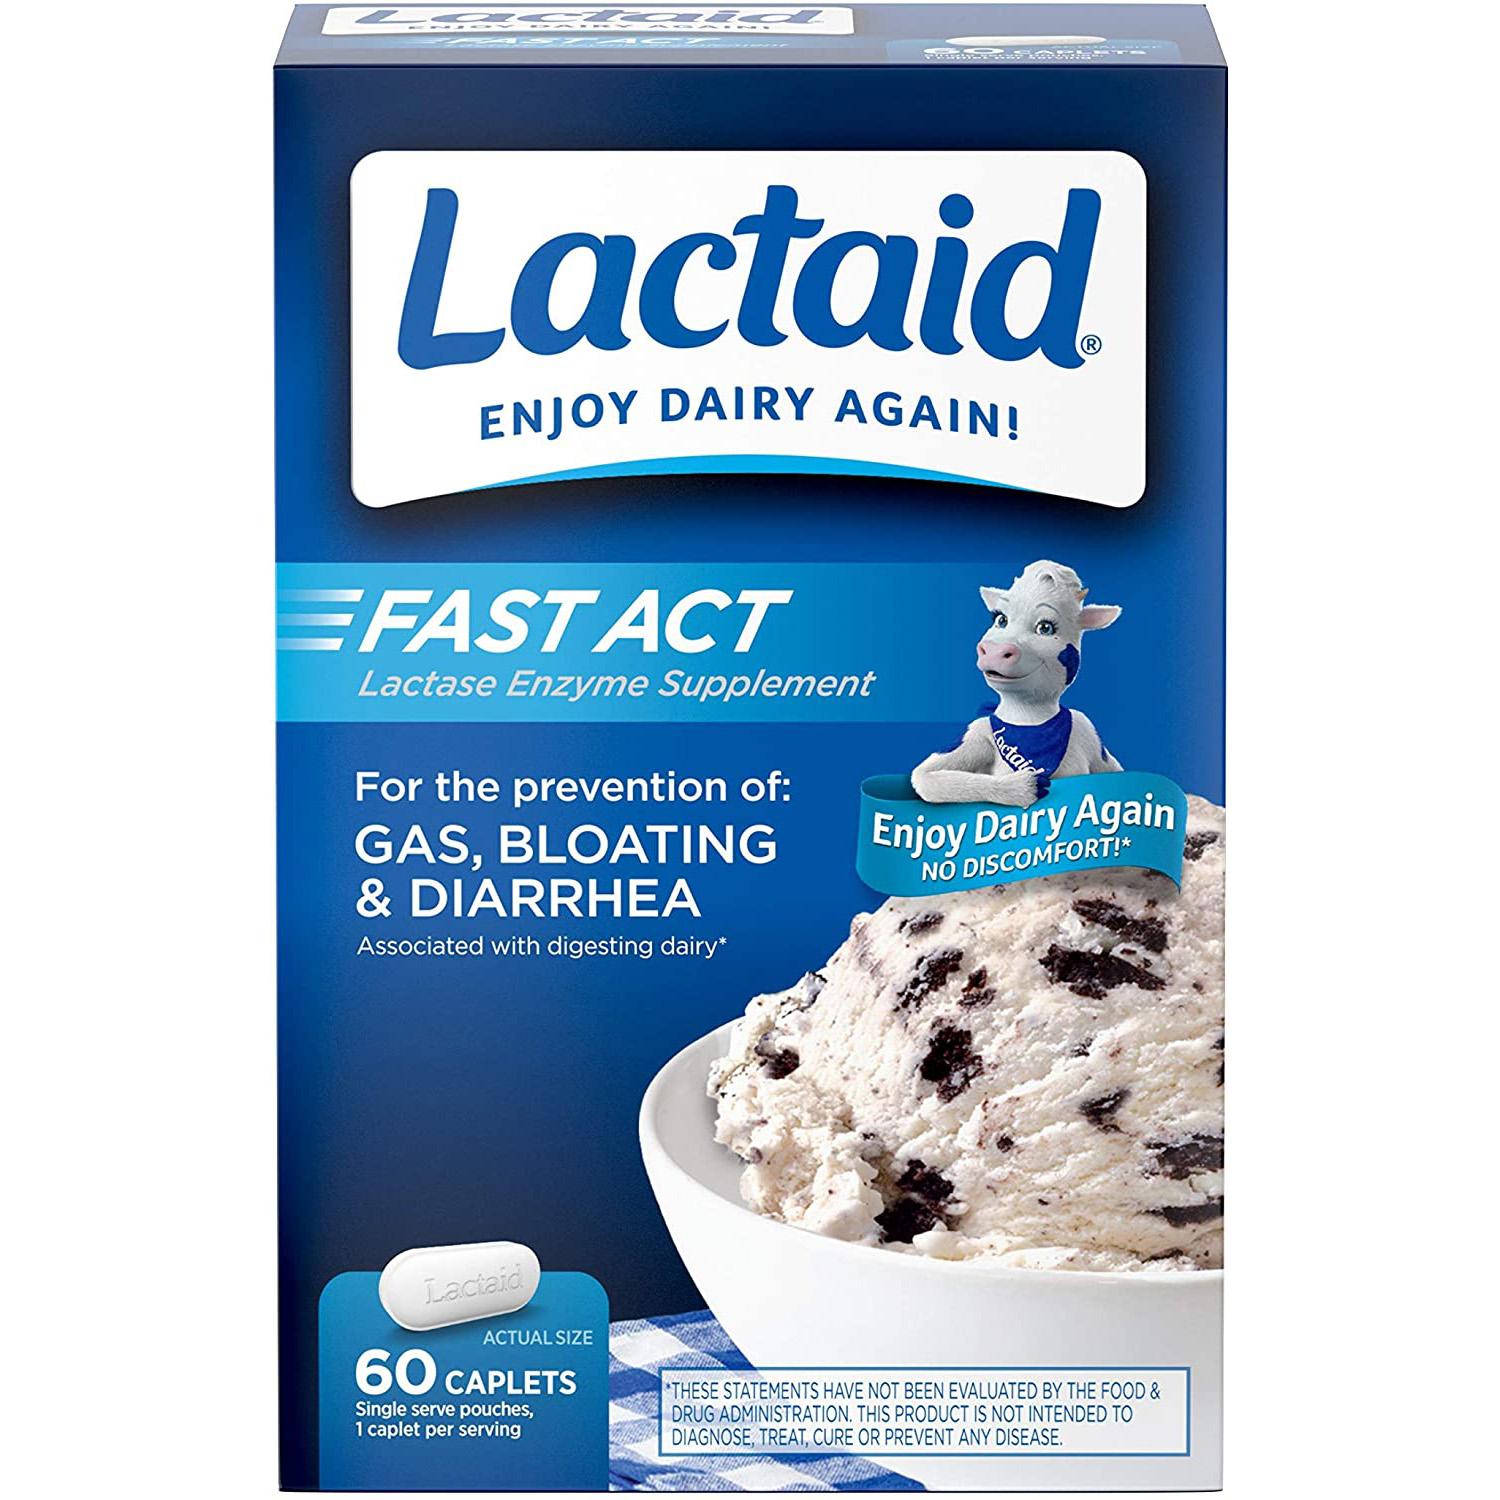 60 Lactaid Fast Act Lactose Intolerance Relief Caplets for 7.96 Shipped